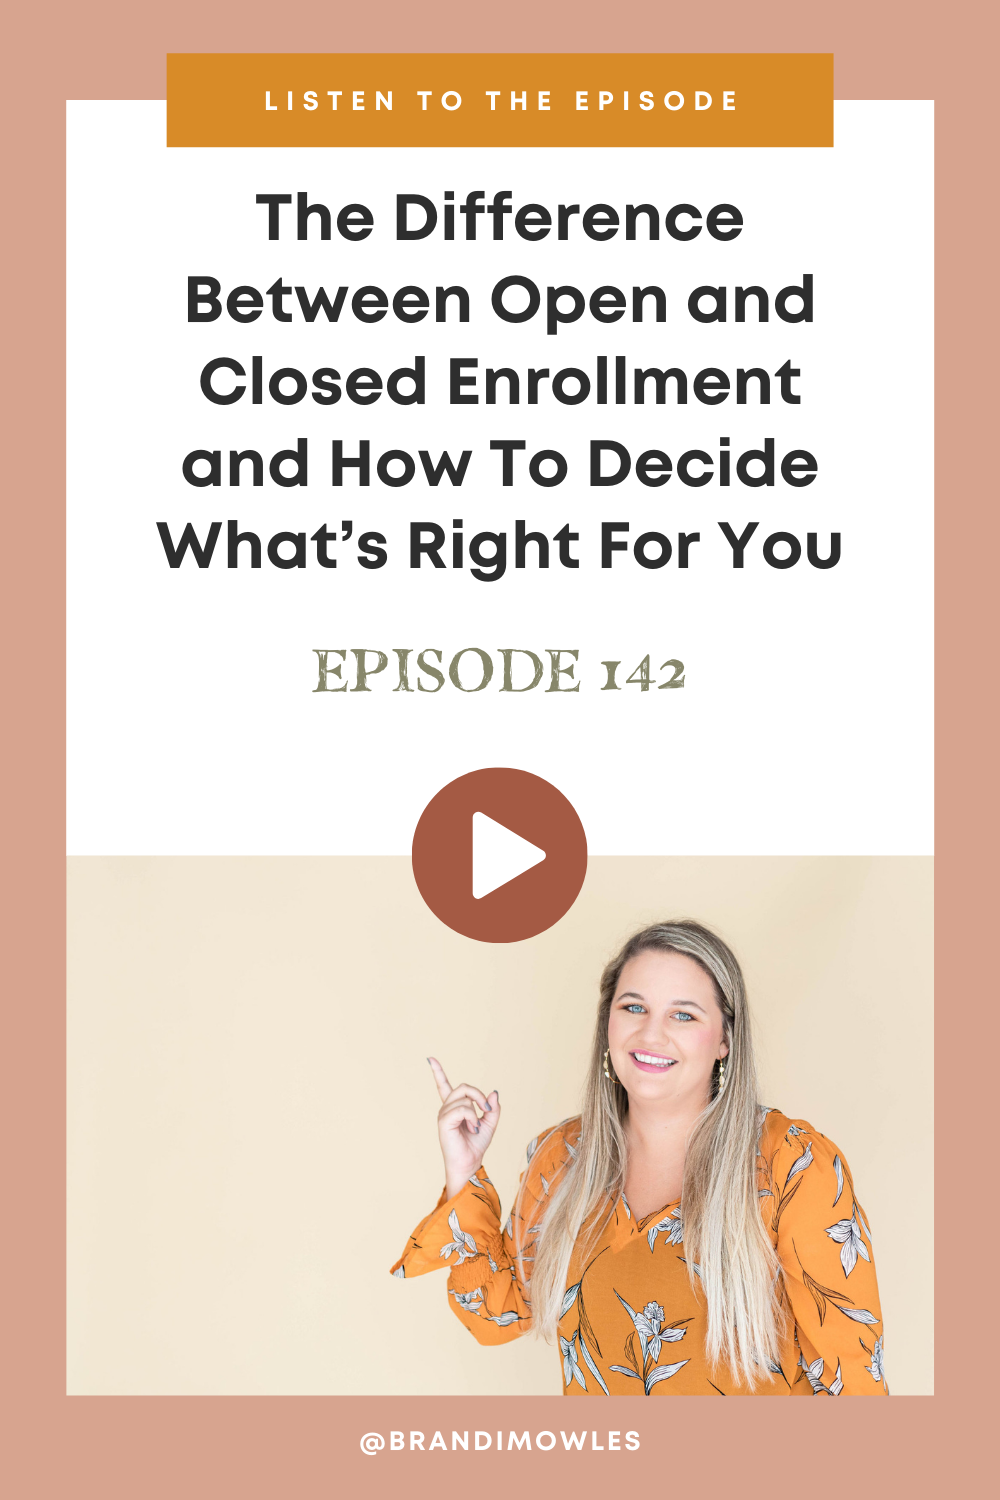 Brandi Mowles podcast episode feature about open and closed enrollment